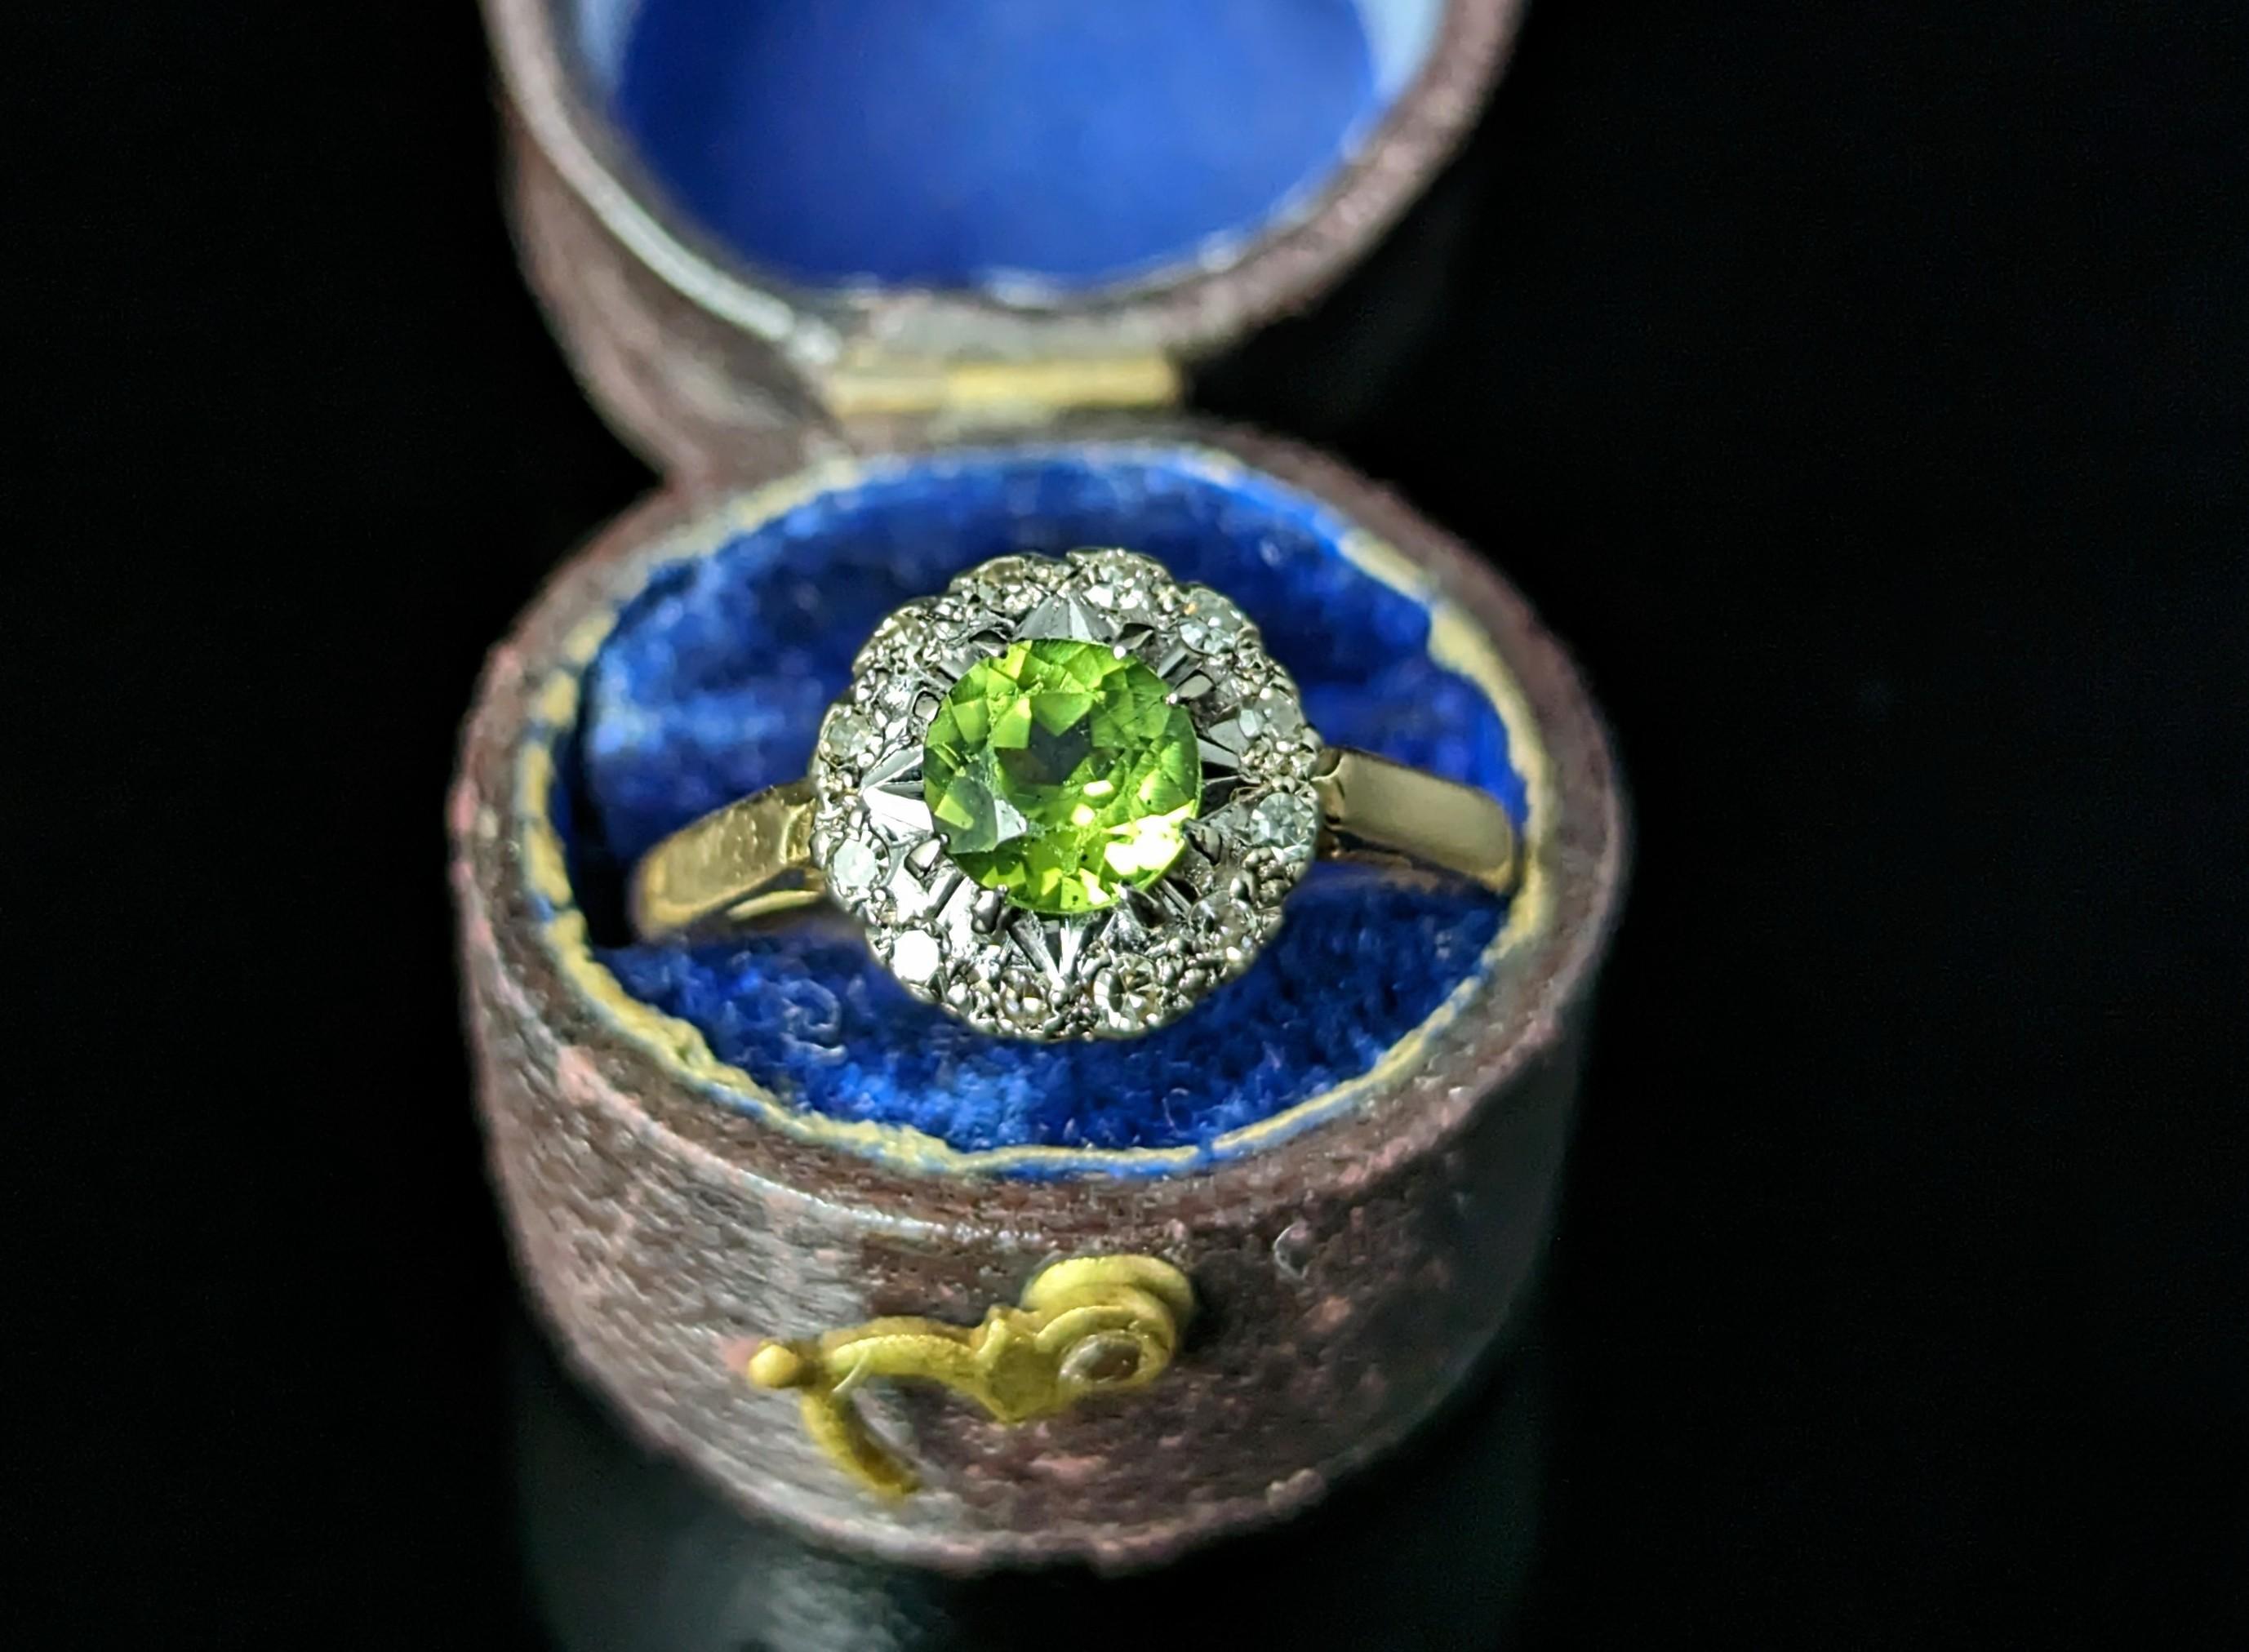 Cheerful and vibrant this vintage Peridot and diamond cluster ring exudes playful luxury.

The vibrant green Peridot set to the centre has the most amazing hue and just can't fail to draw the eye with an approximate 0.75ct weight.

It is set in a